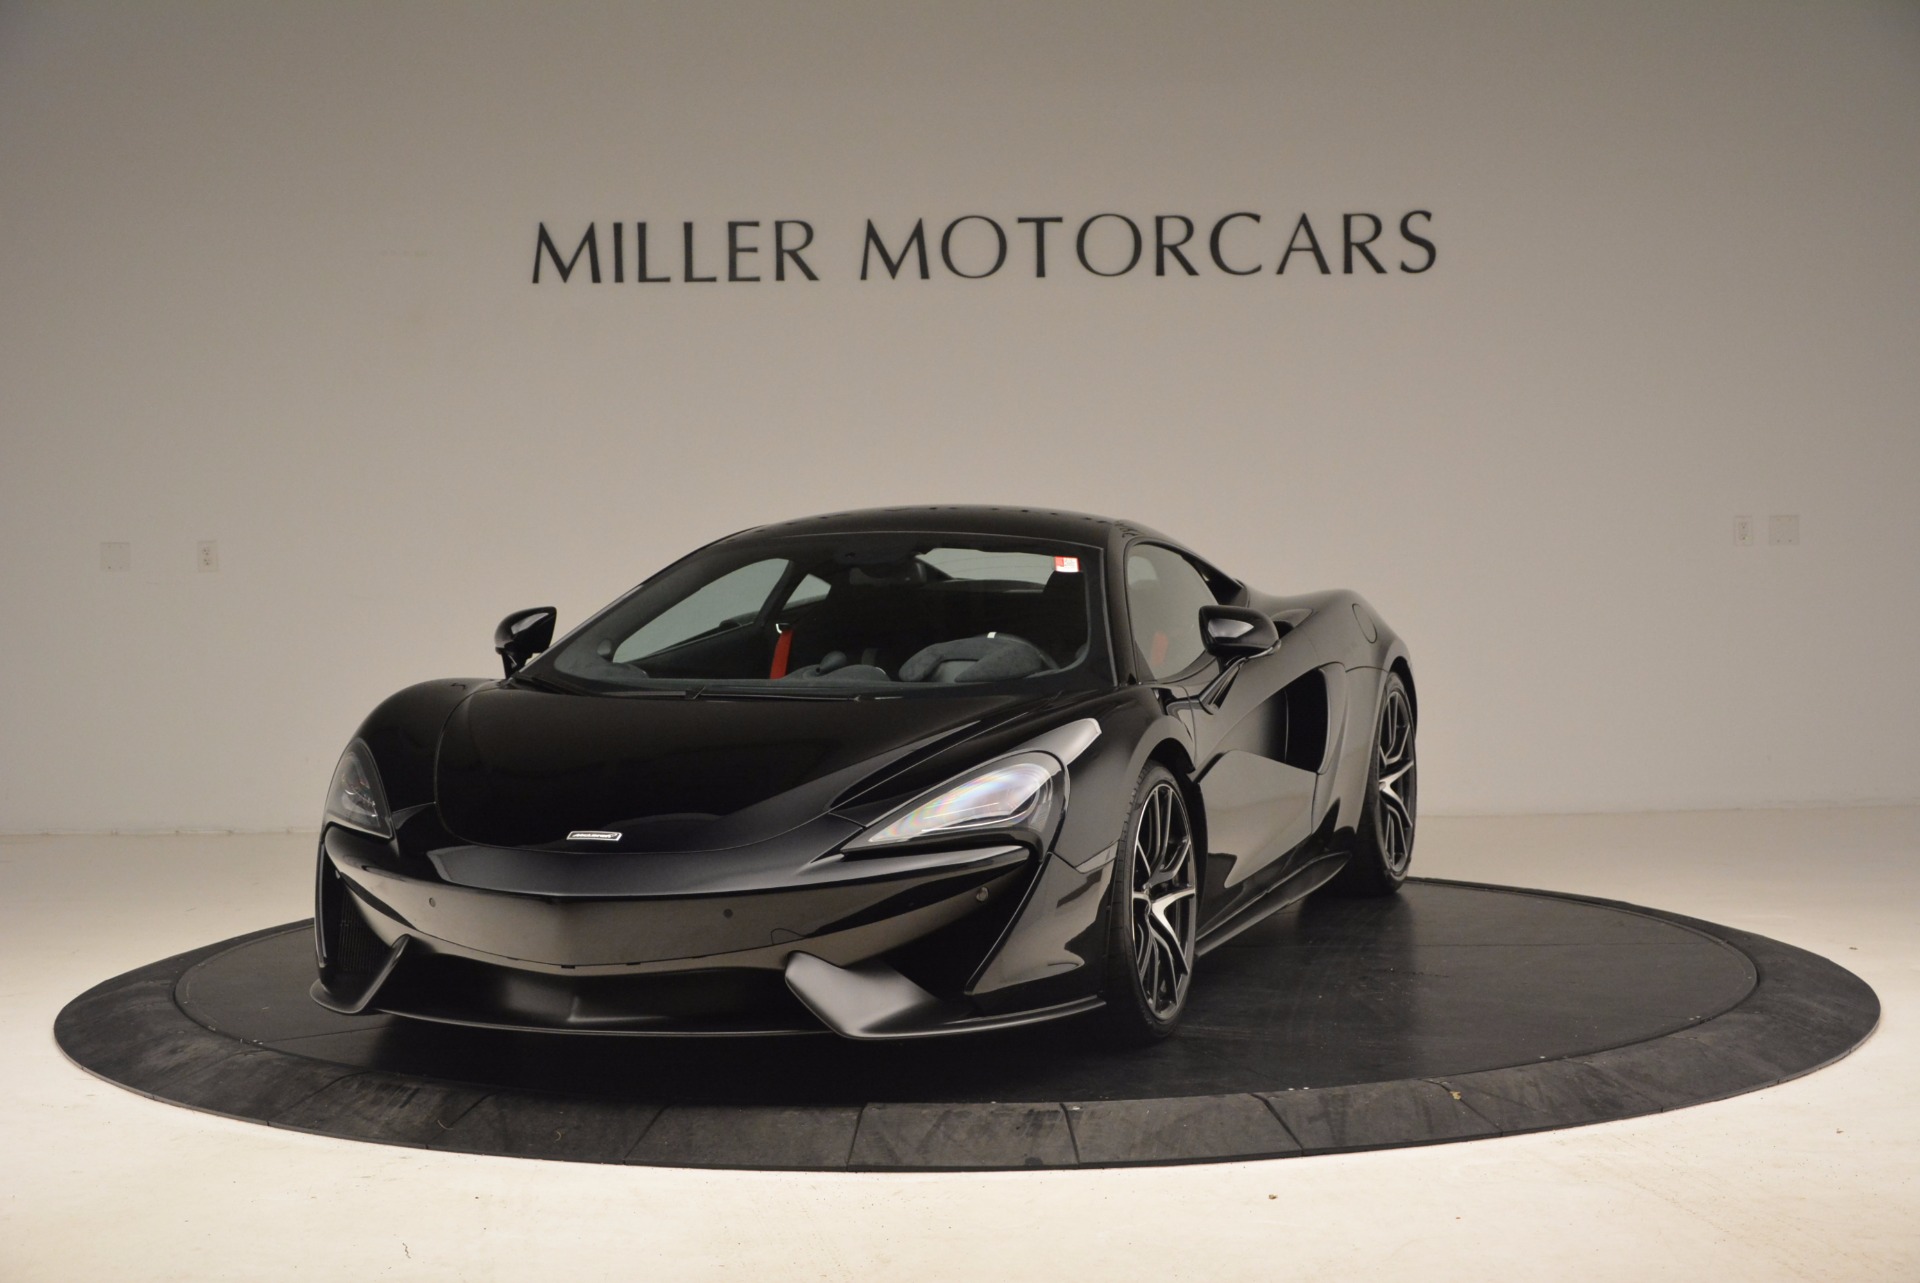 Used 2016 McLaren 570S for sale Sold at Pagani of Greenwich in Greenwich CT 06830 1